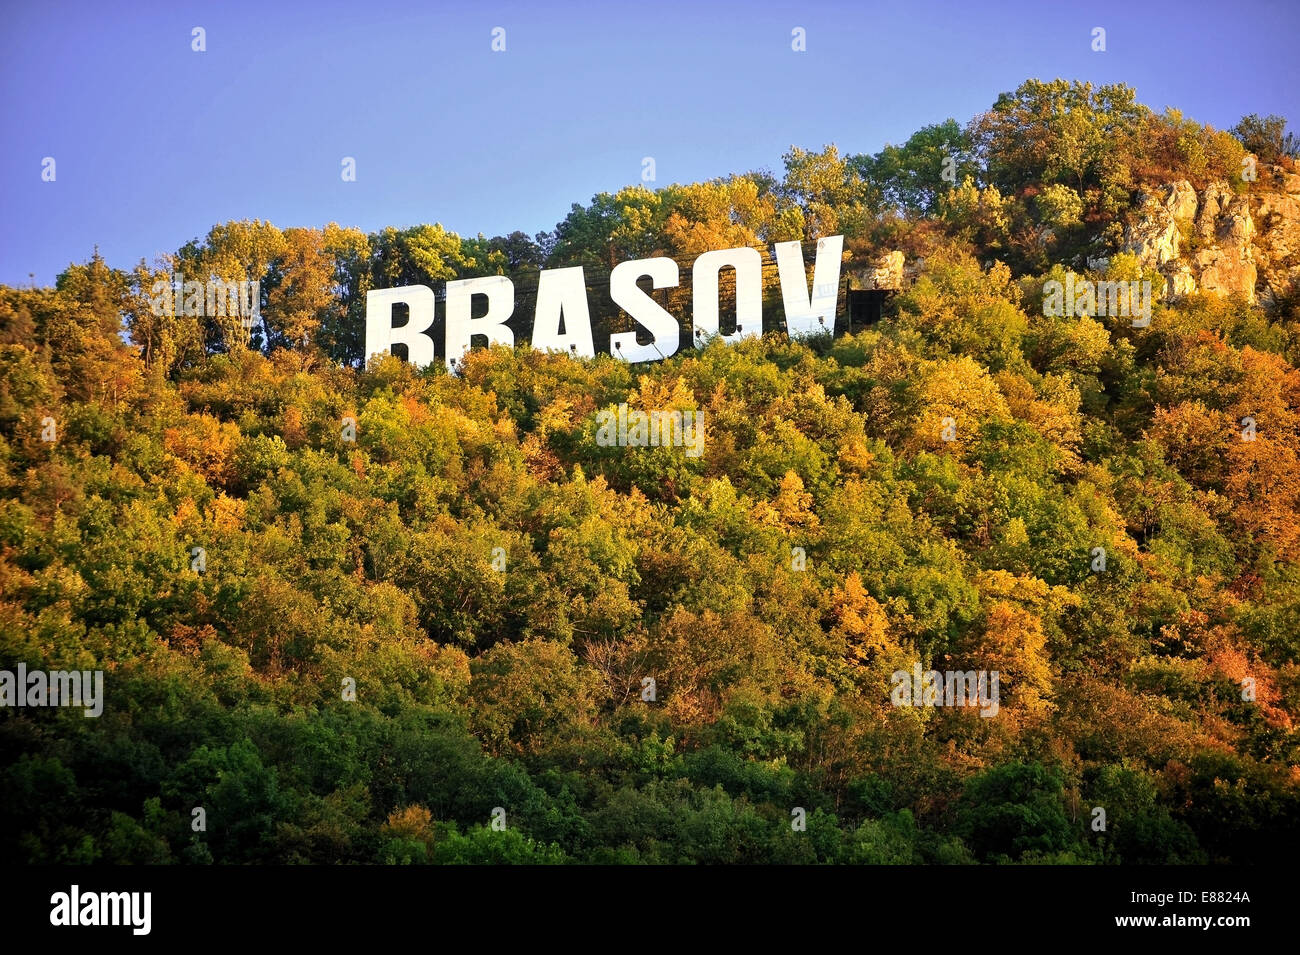 Autumn image with Brasov city sign on top of Tampa mountain Stock Photo